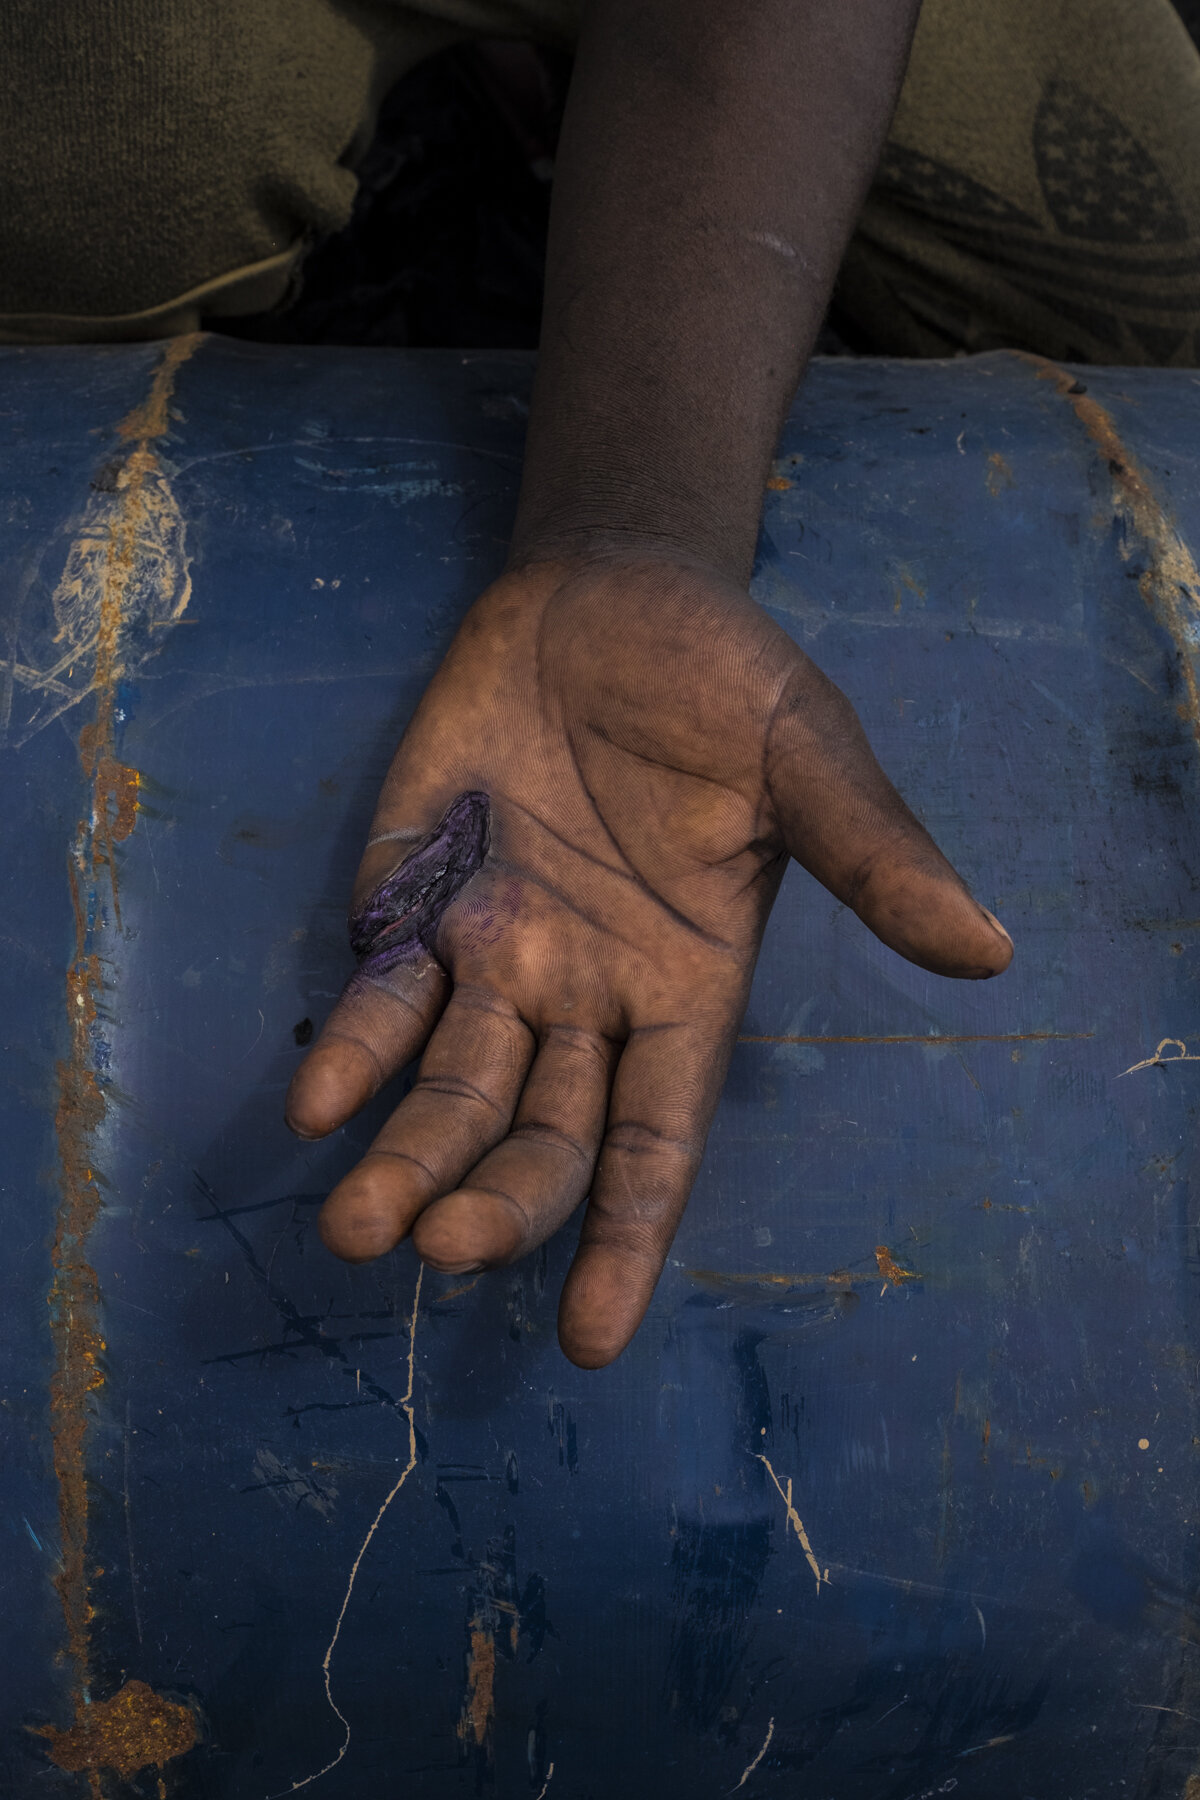  Ghana, Accra, October 2018. A worker's hand with a wound caused by the burning of cables, computers and other appliances in the Agbogbloshie scrap yard. In most cases workers don't visit any doctors or take any medications, as they can not afford to